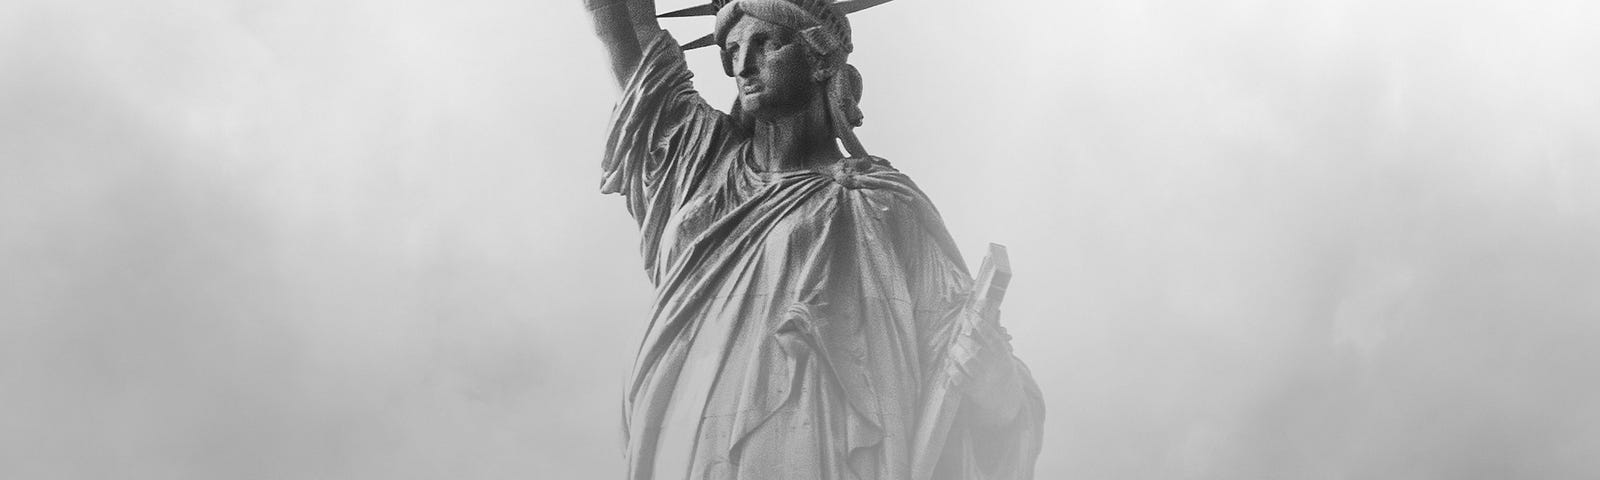 A black and white image of the Statue of Liberty emerging from the fog of dictators.